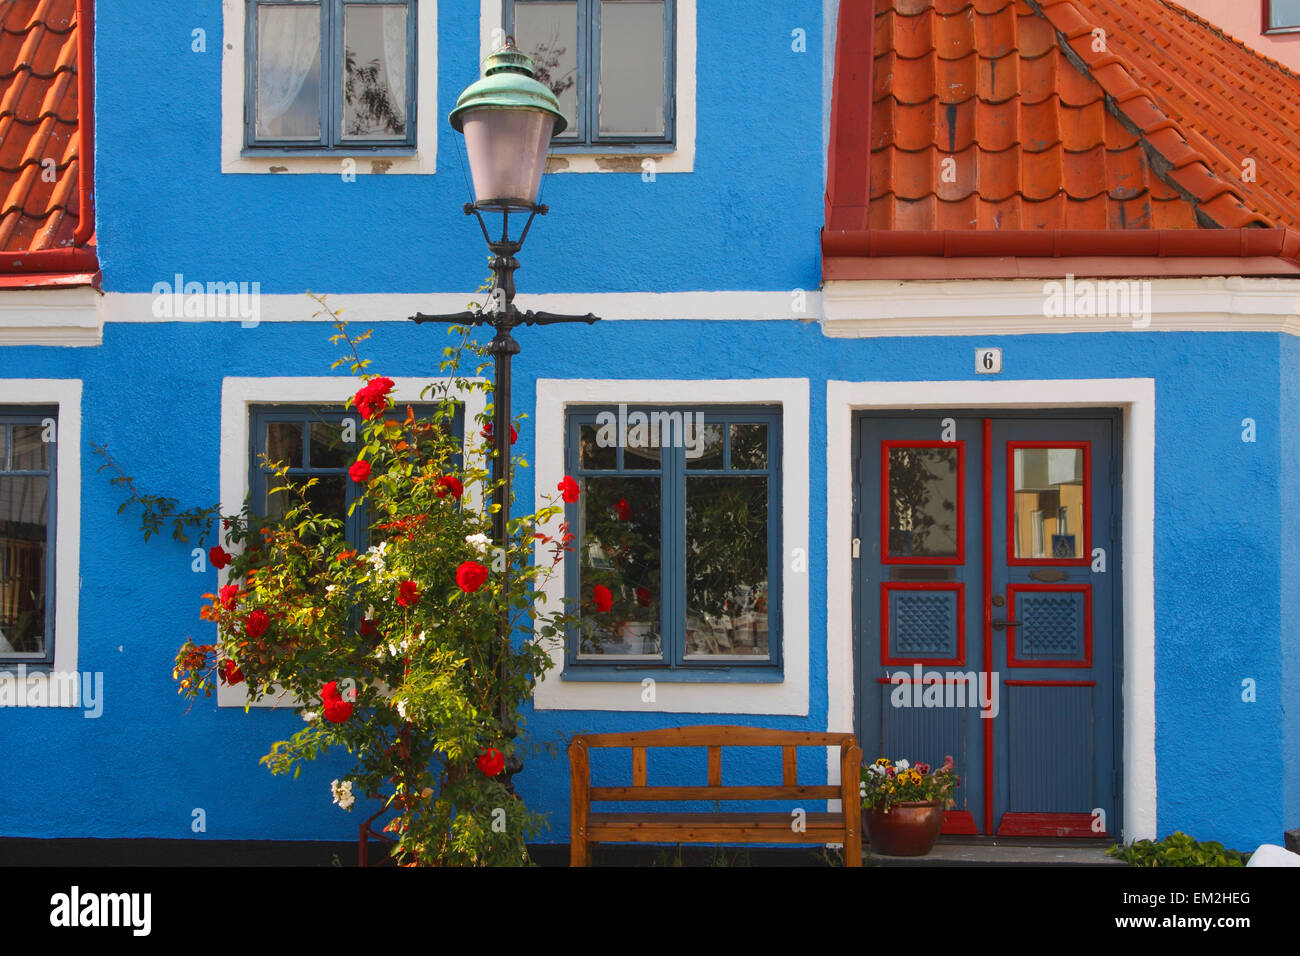 Blue House In The Old Town; Ystad Skane Sweden Stock Photo